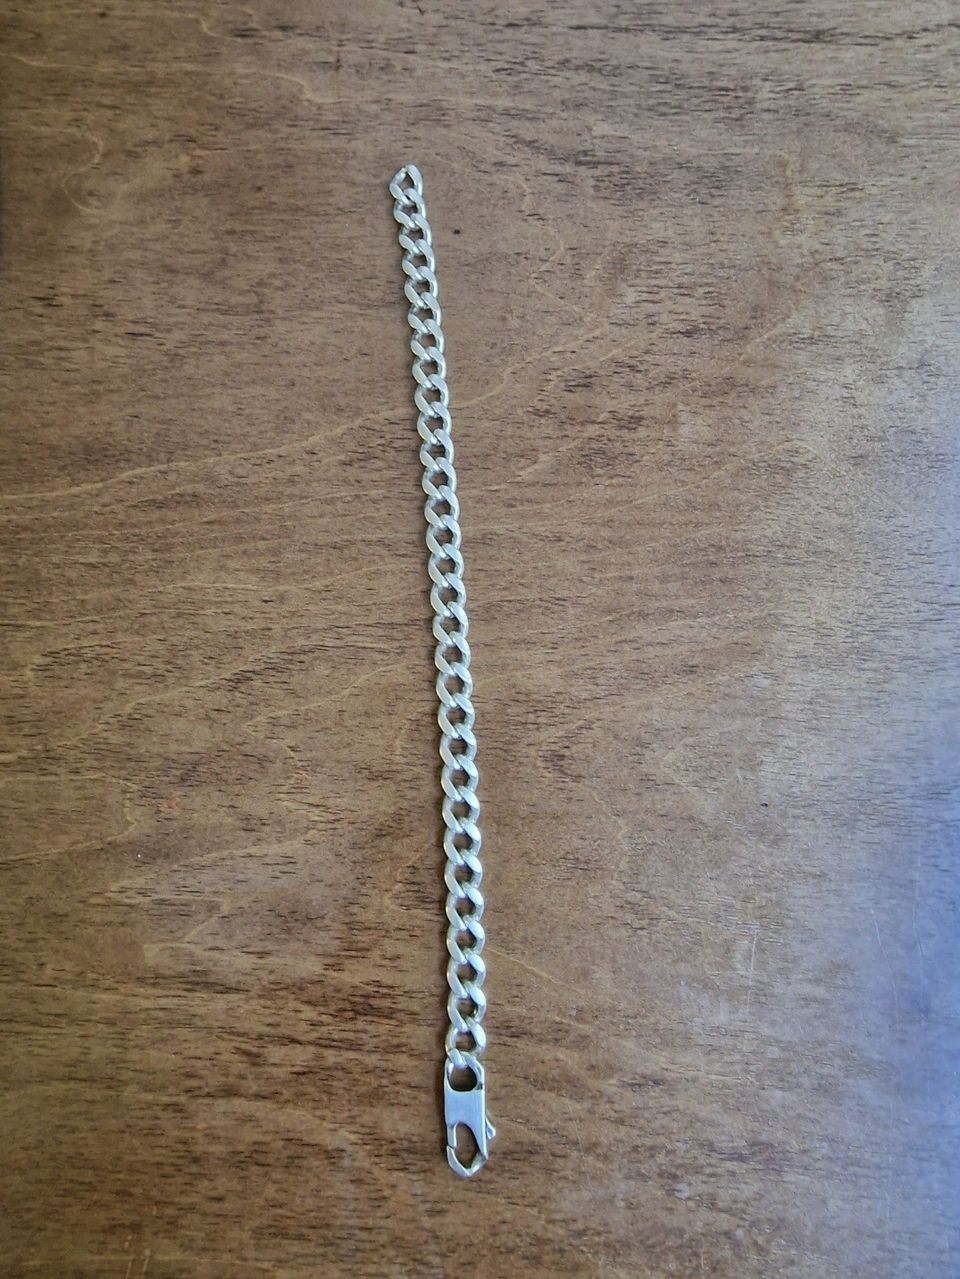 Almost new silver bracelet. Length 28 cm The width is 1 cm 32g